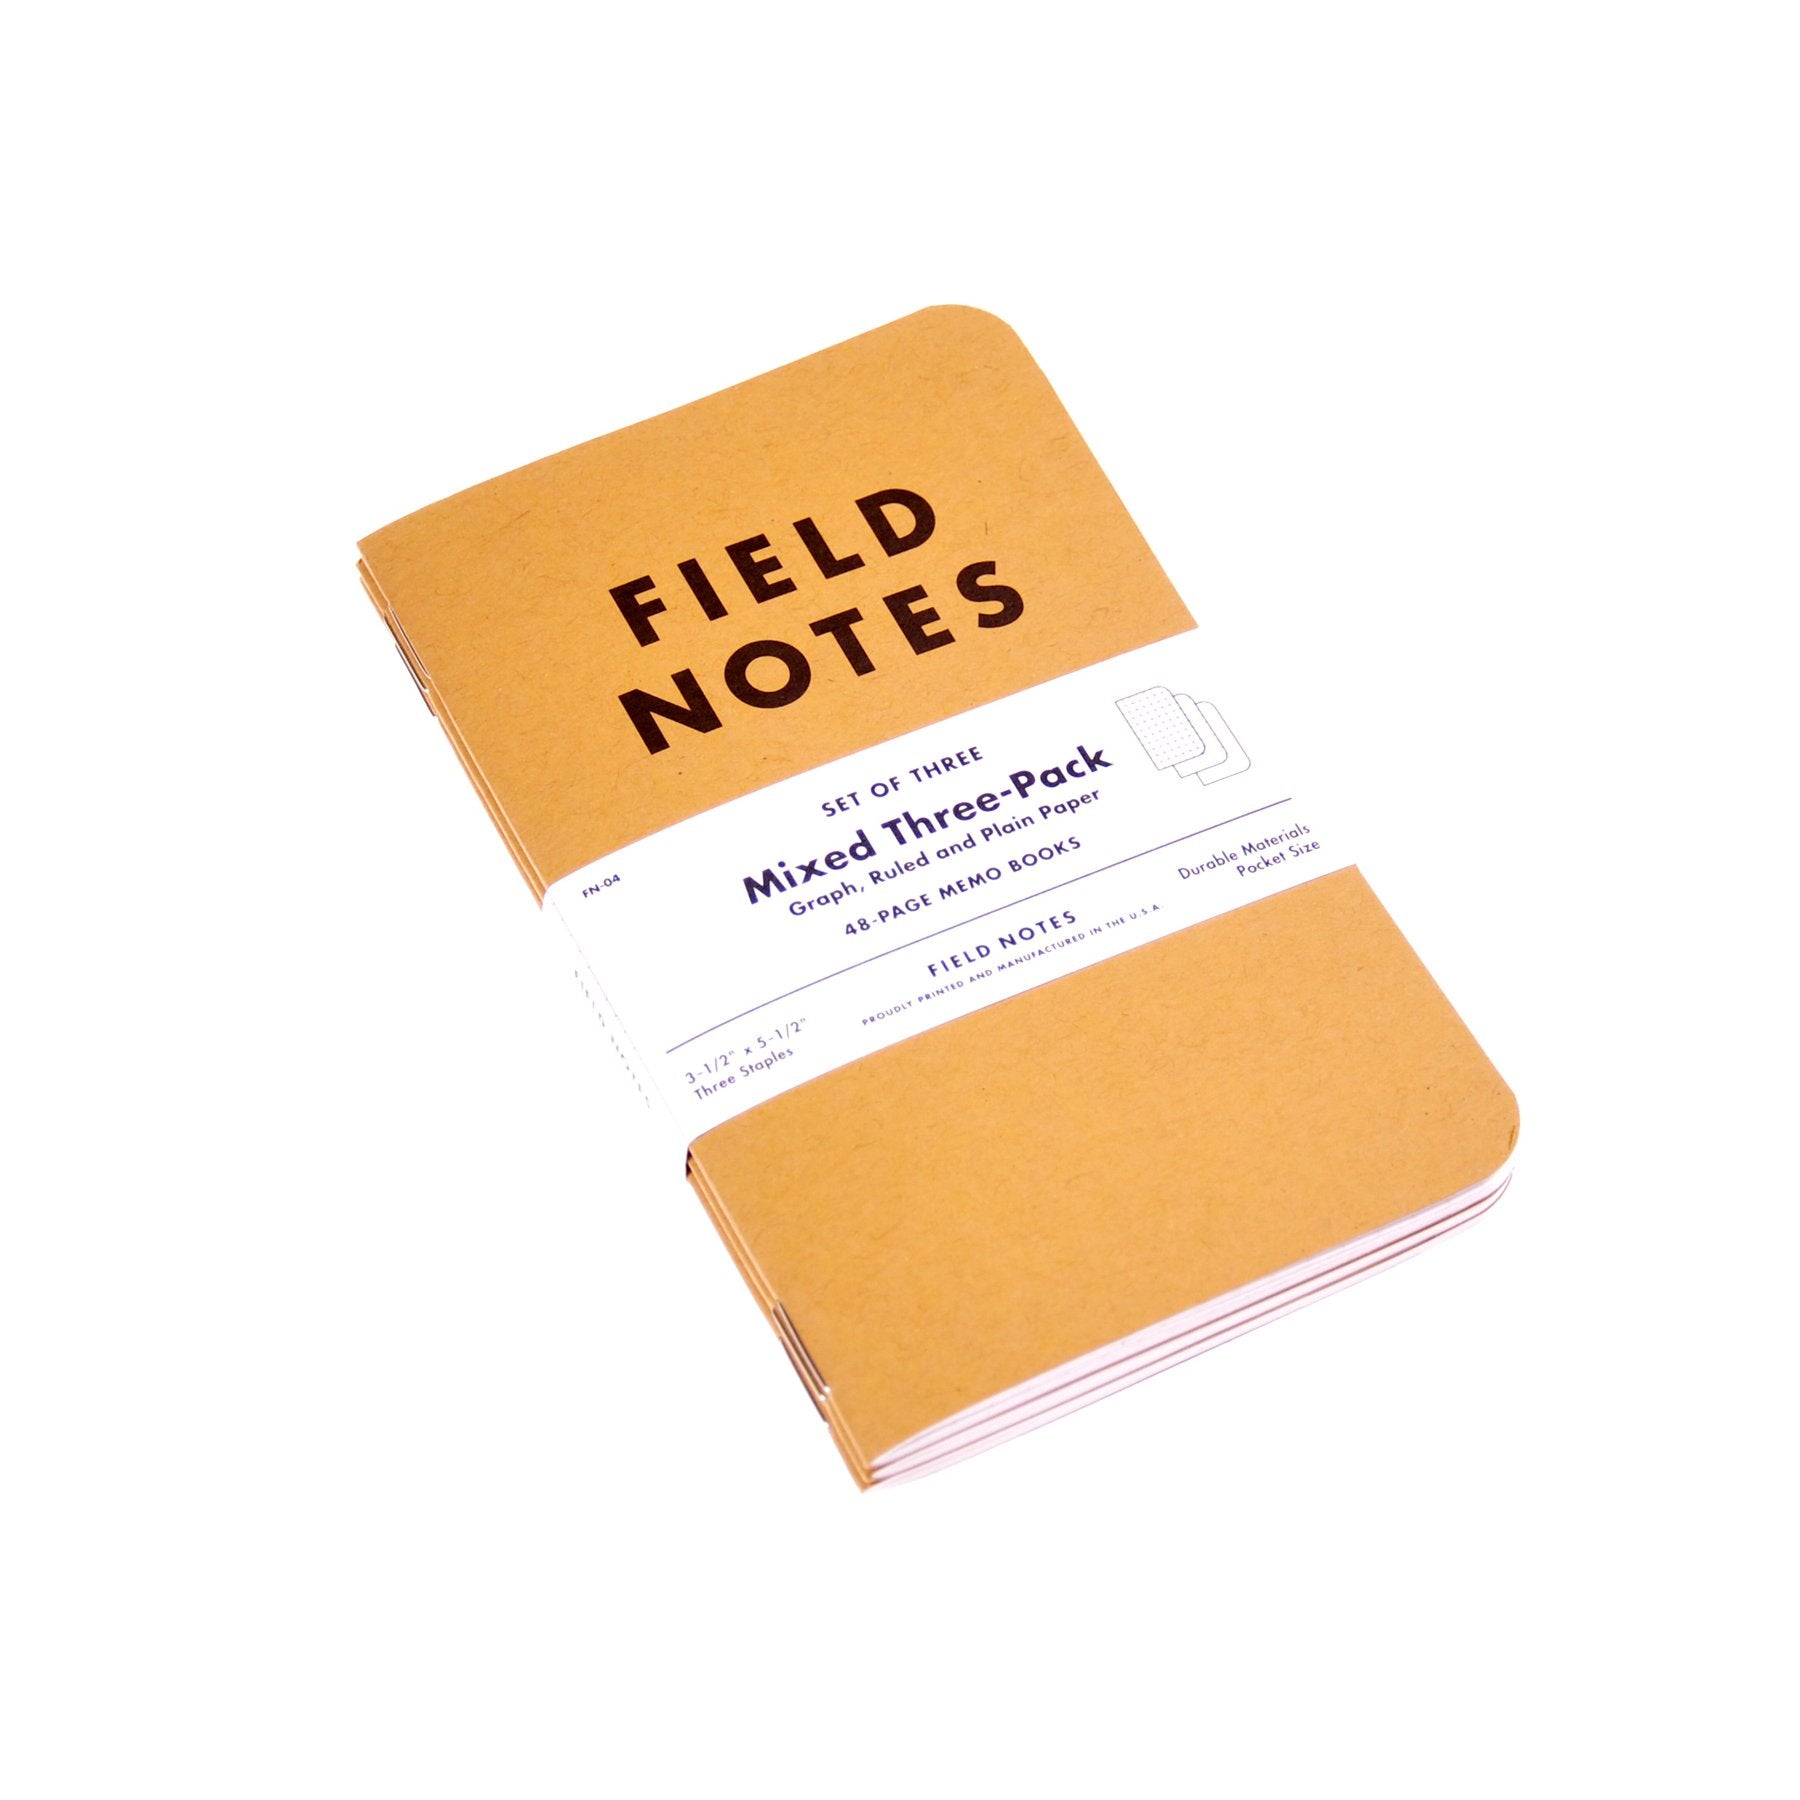 Field Notes 3-pack